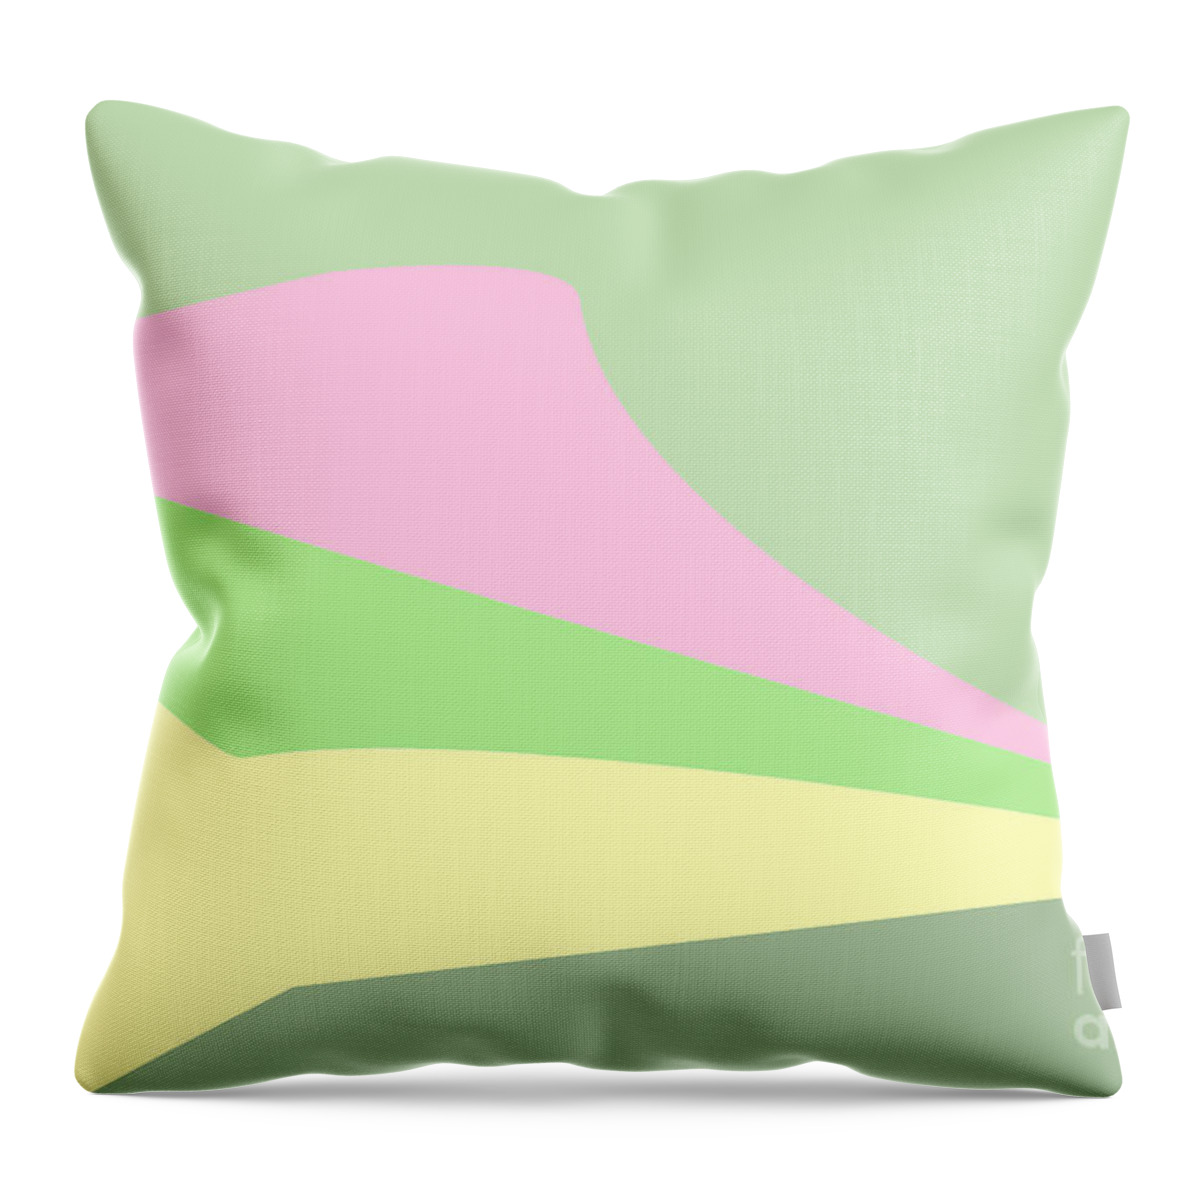 Contemporary Art Throw Pillow featuring the digital art The Other Night by Jeremiah Ray